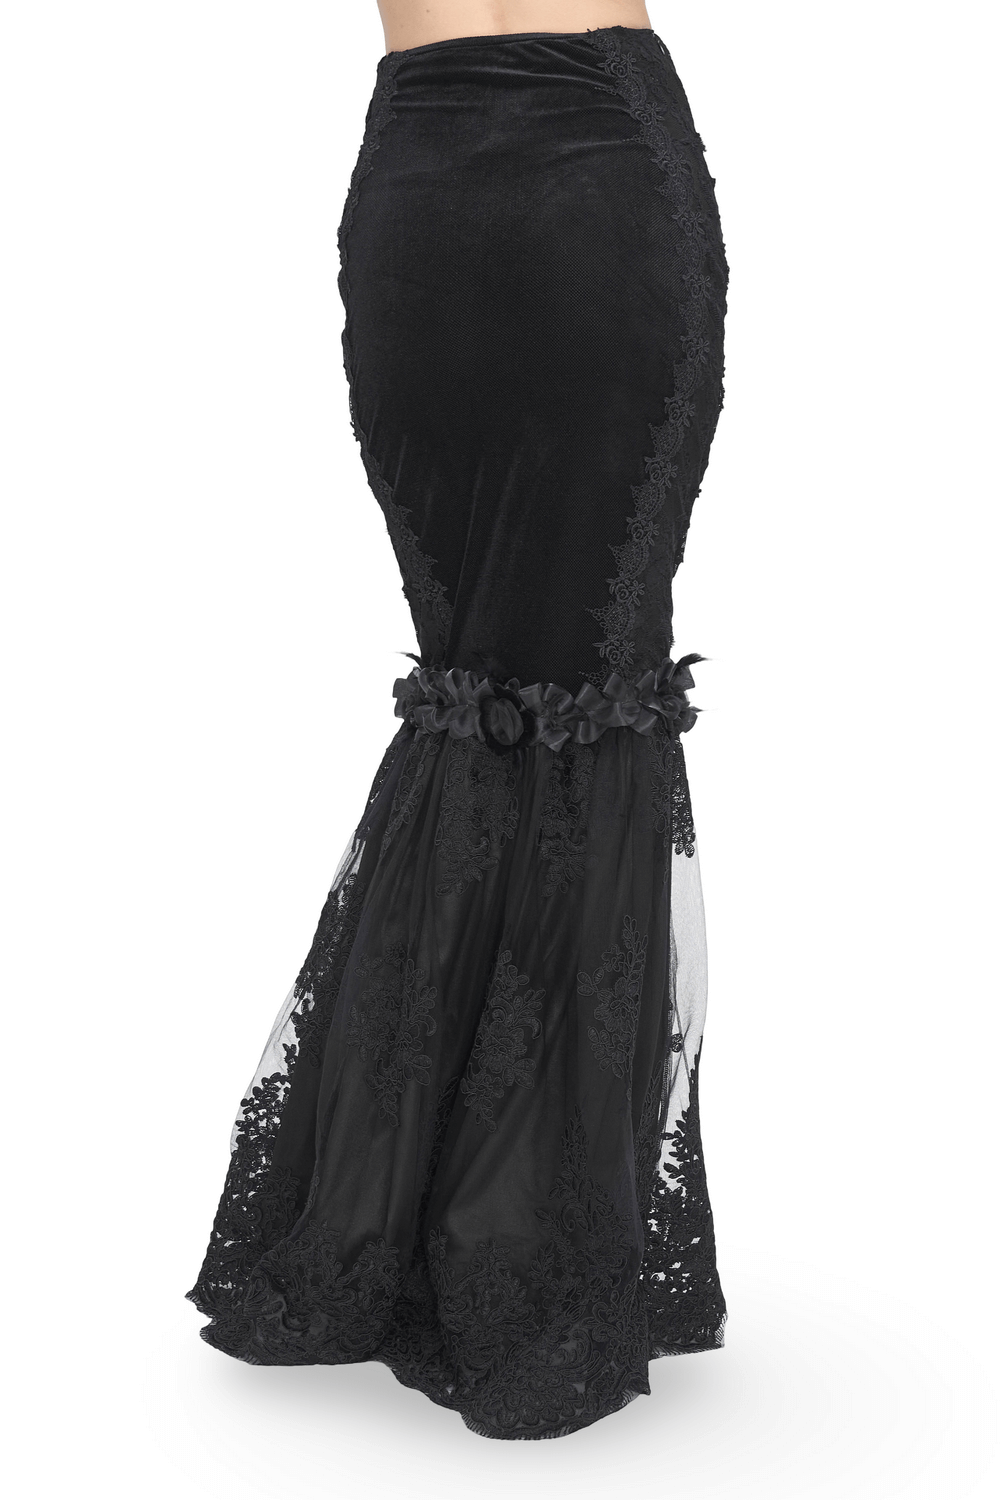 Gothic-Style Skirt with Lace Details and Floral Accents